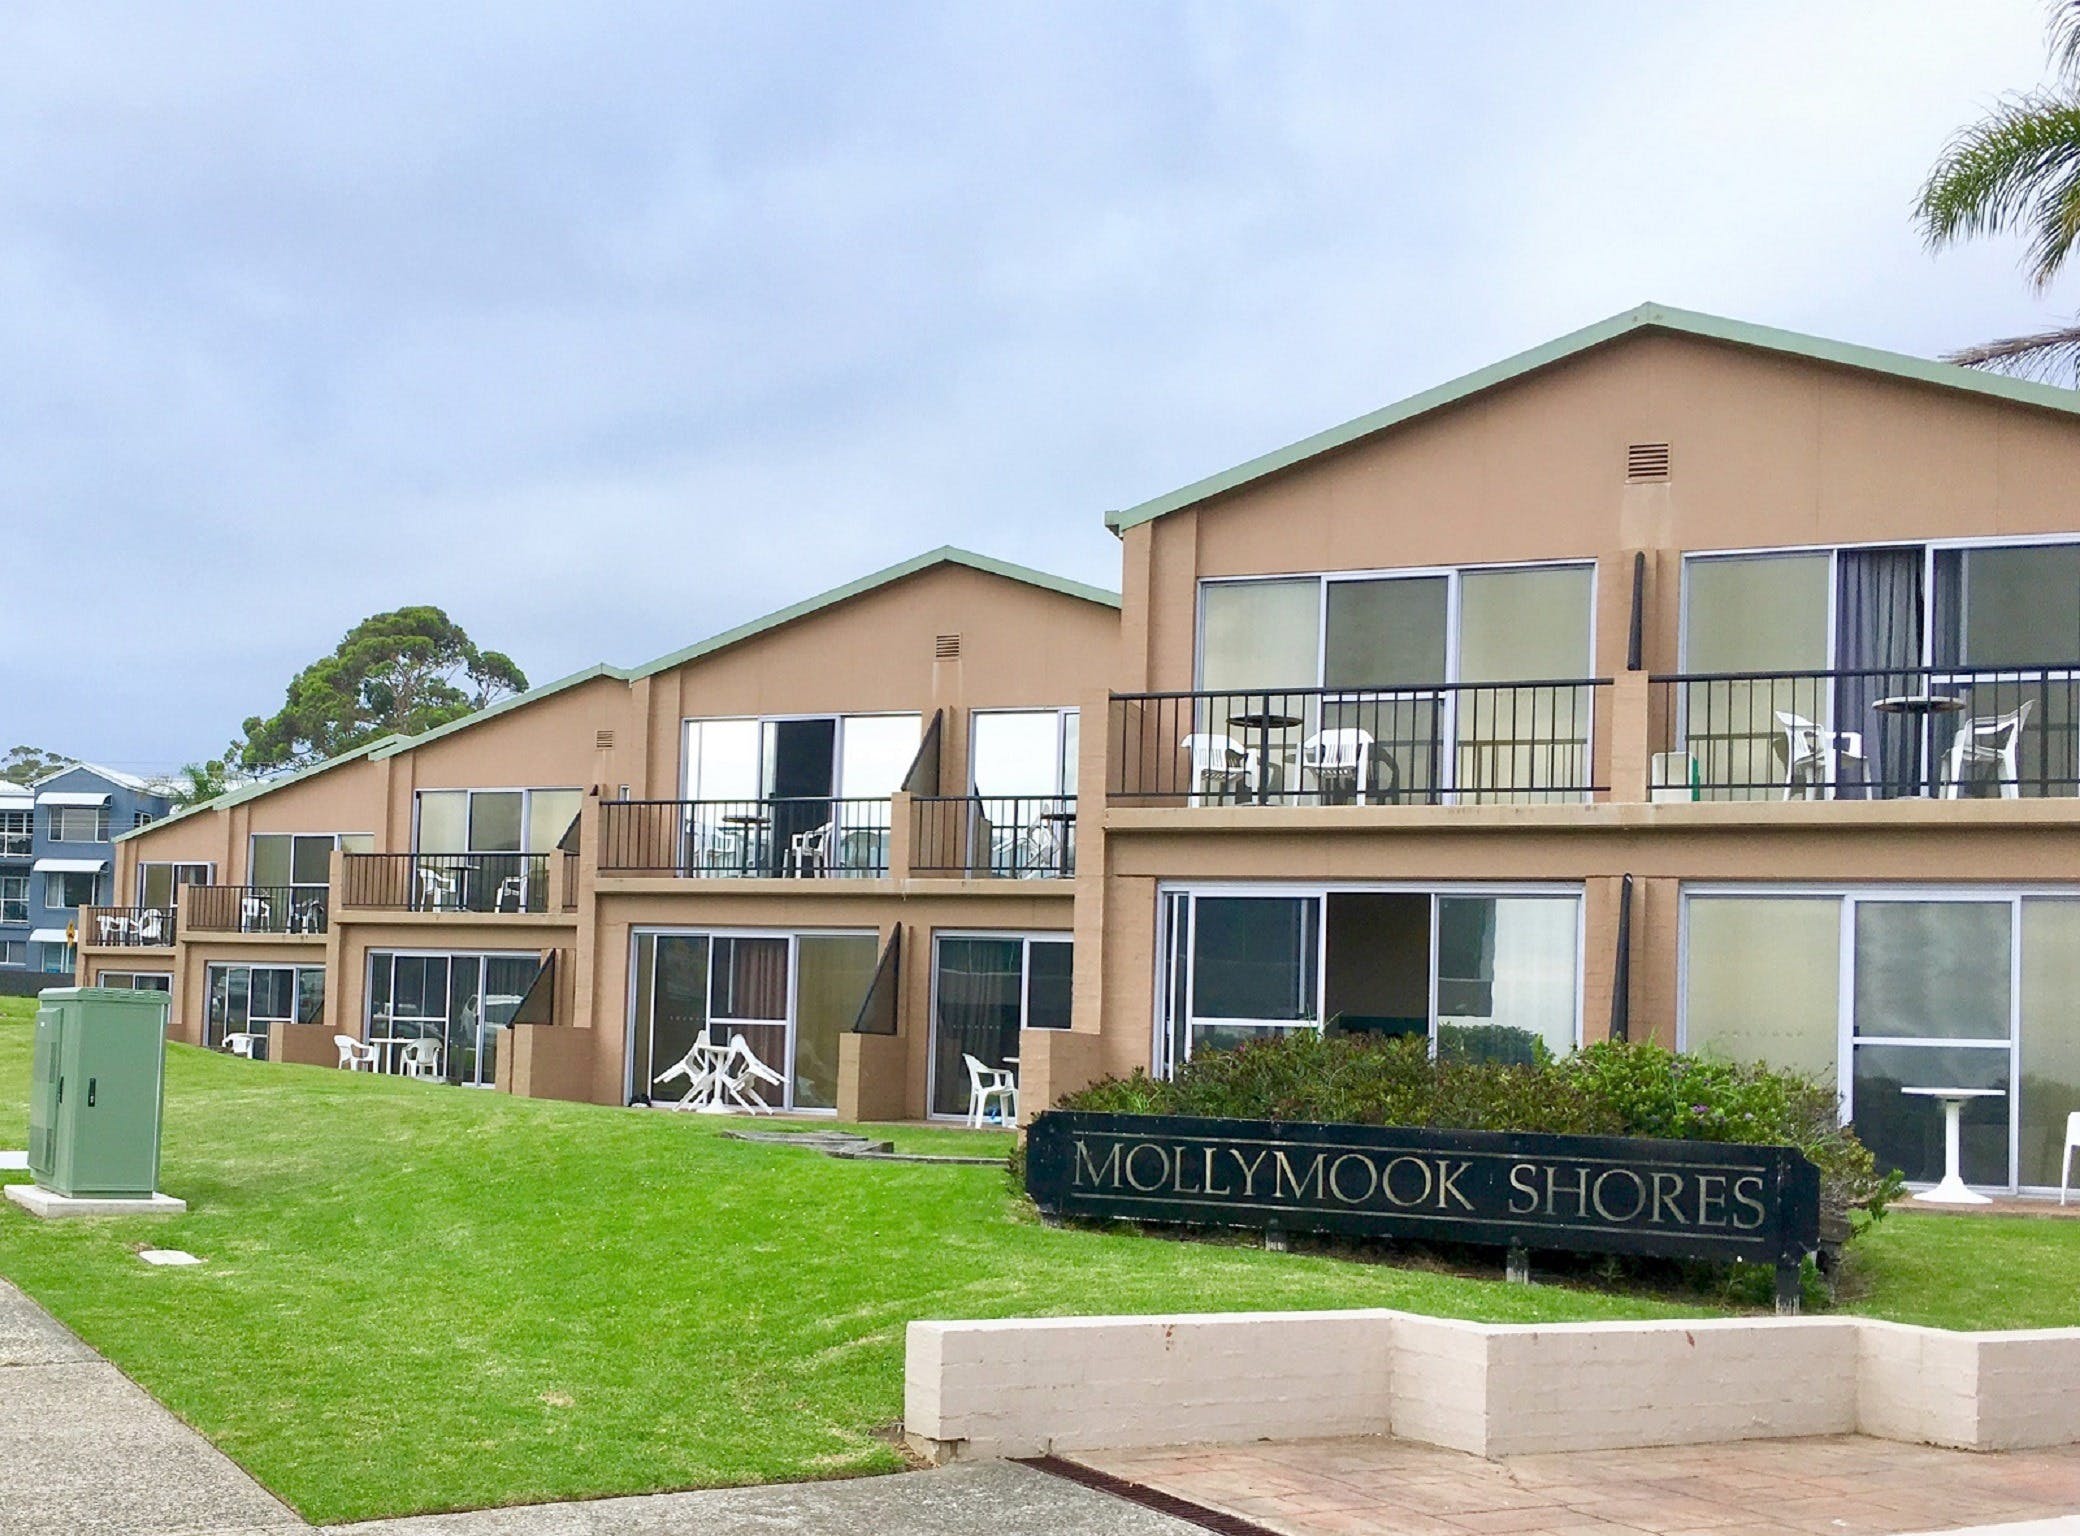 Mollymook Shores Motel And Conference Centre - thumb 2